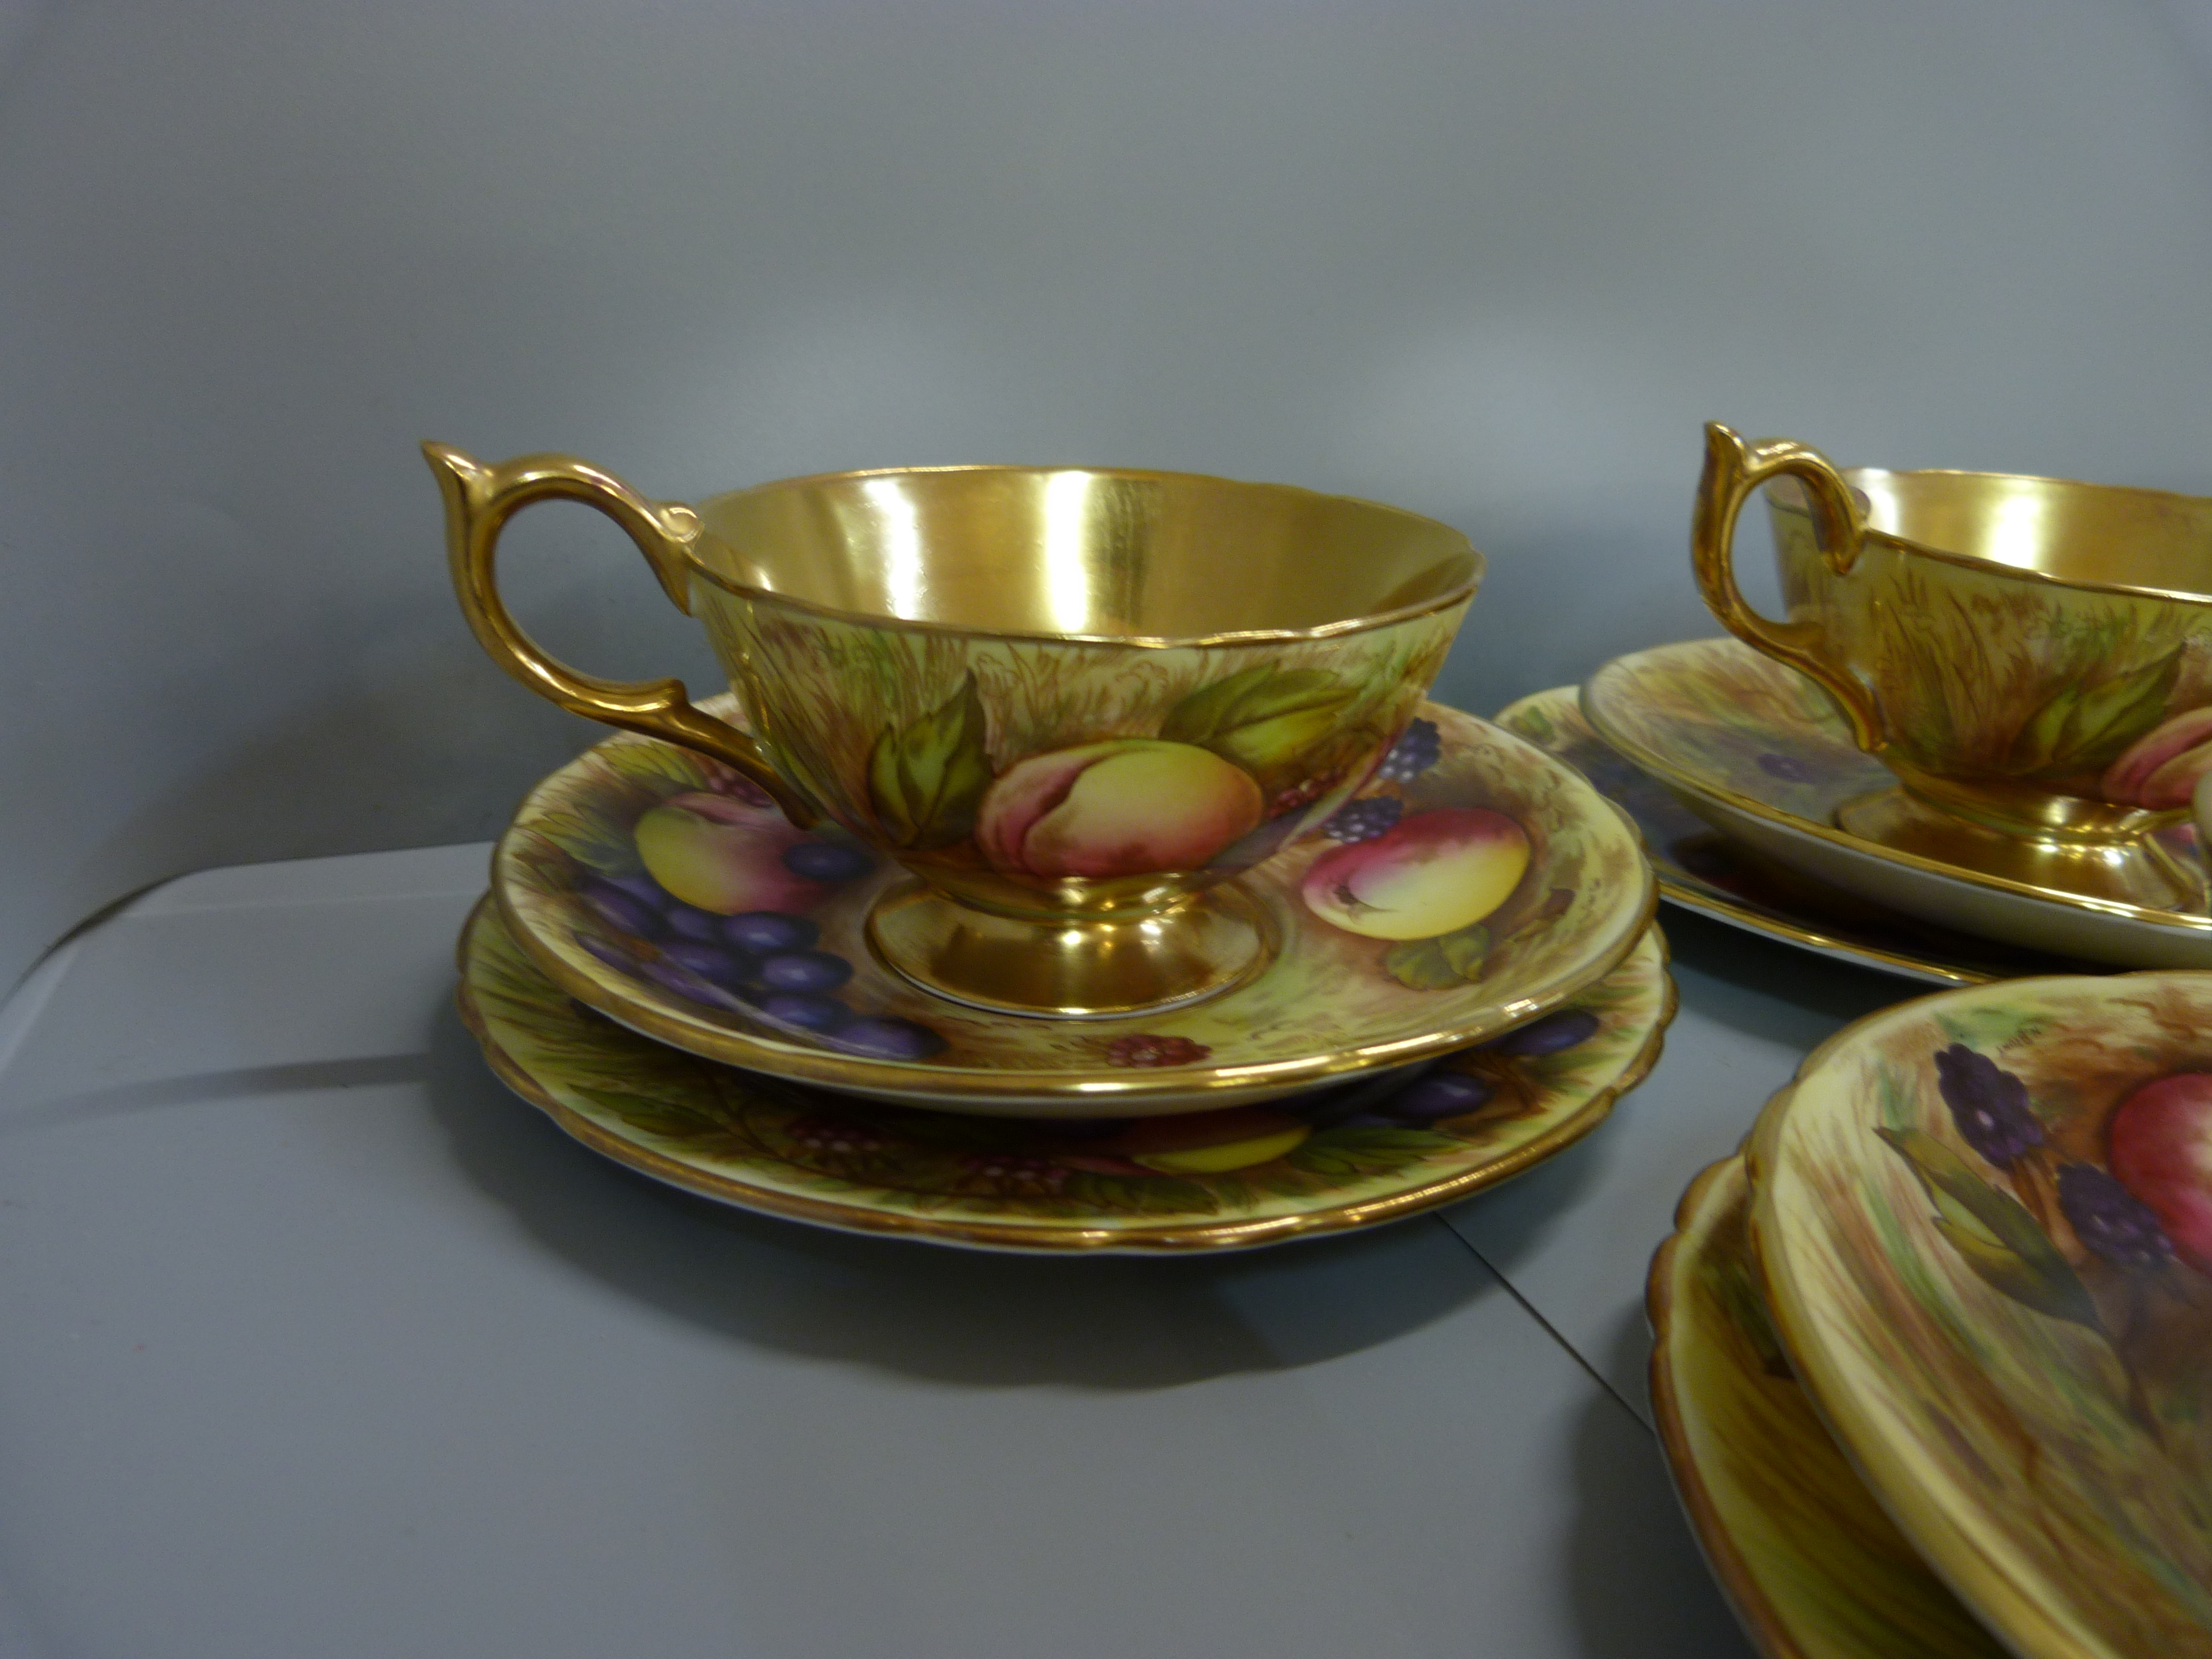 A set of six Aynsley cups, saucers and tea plates, decorated with fruit and berries in gold rim - Image 2 of 13